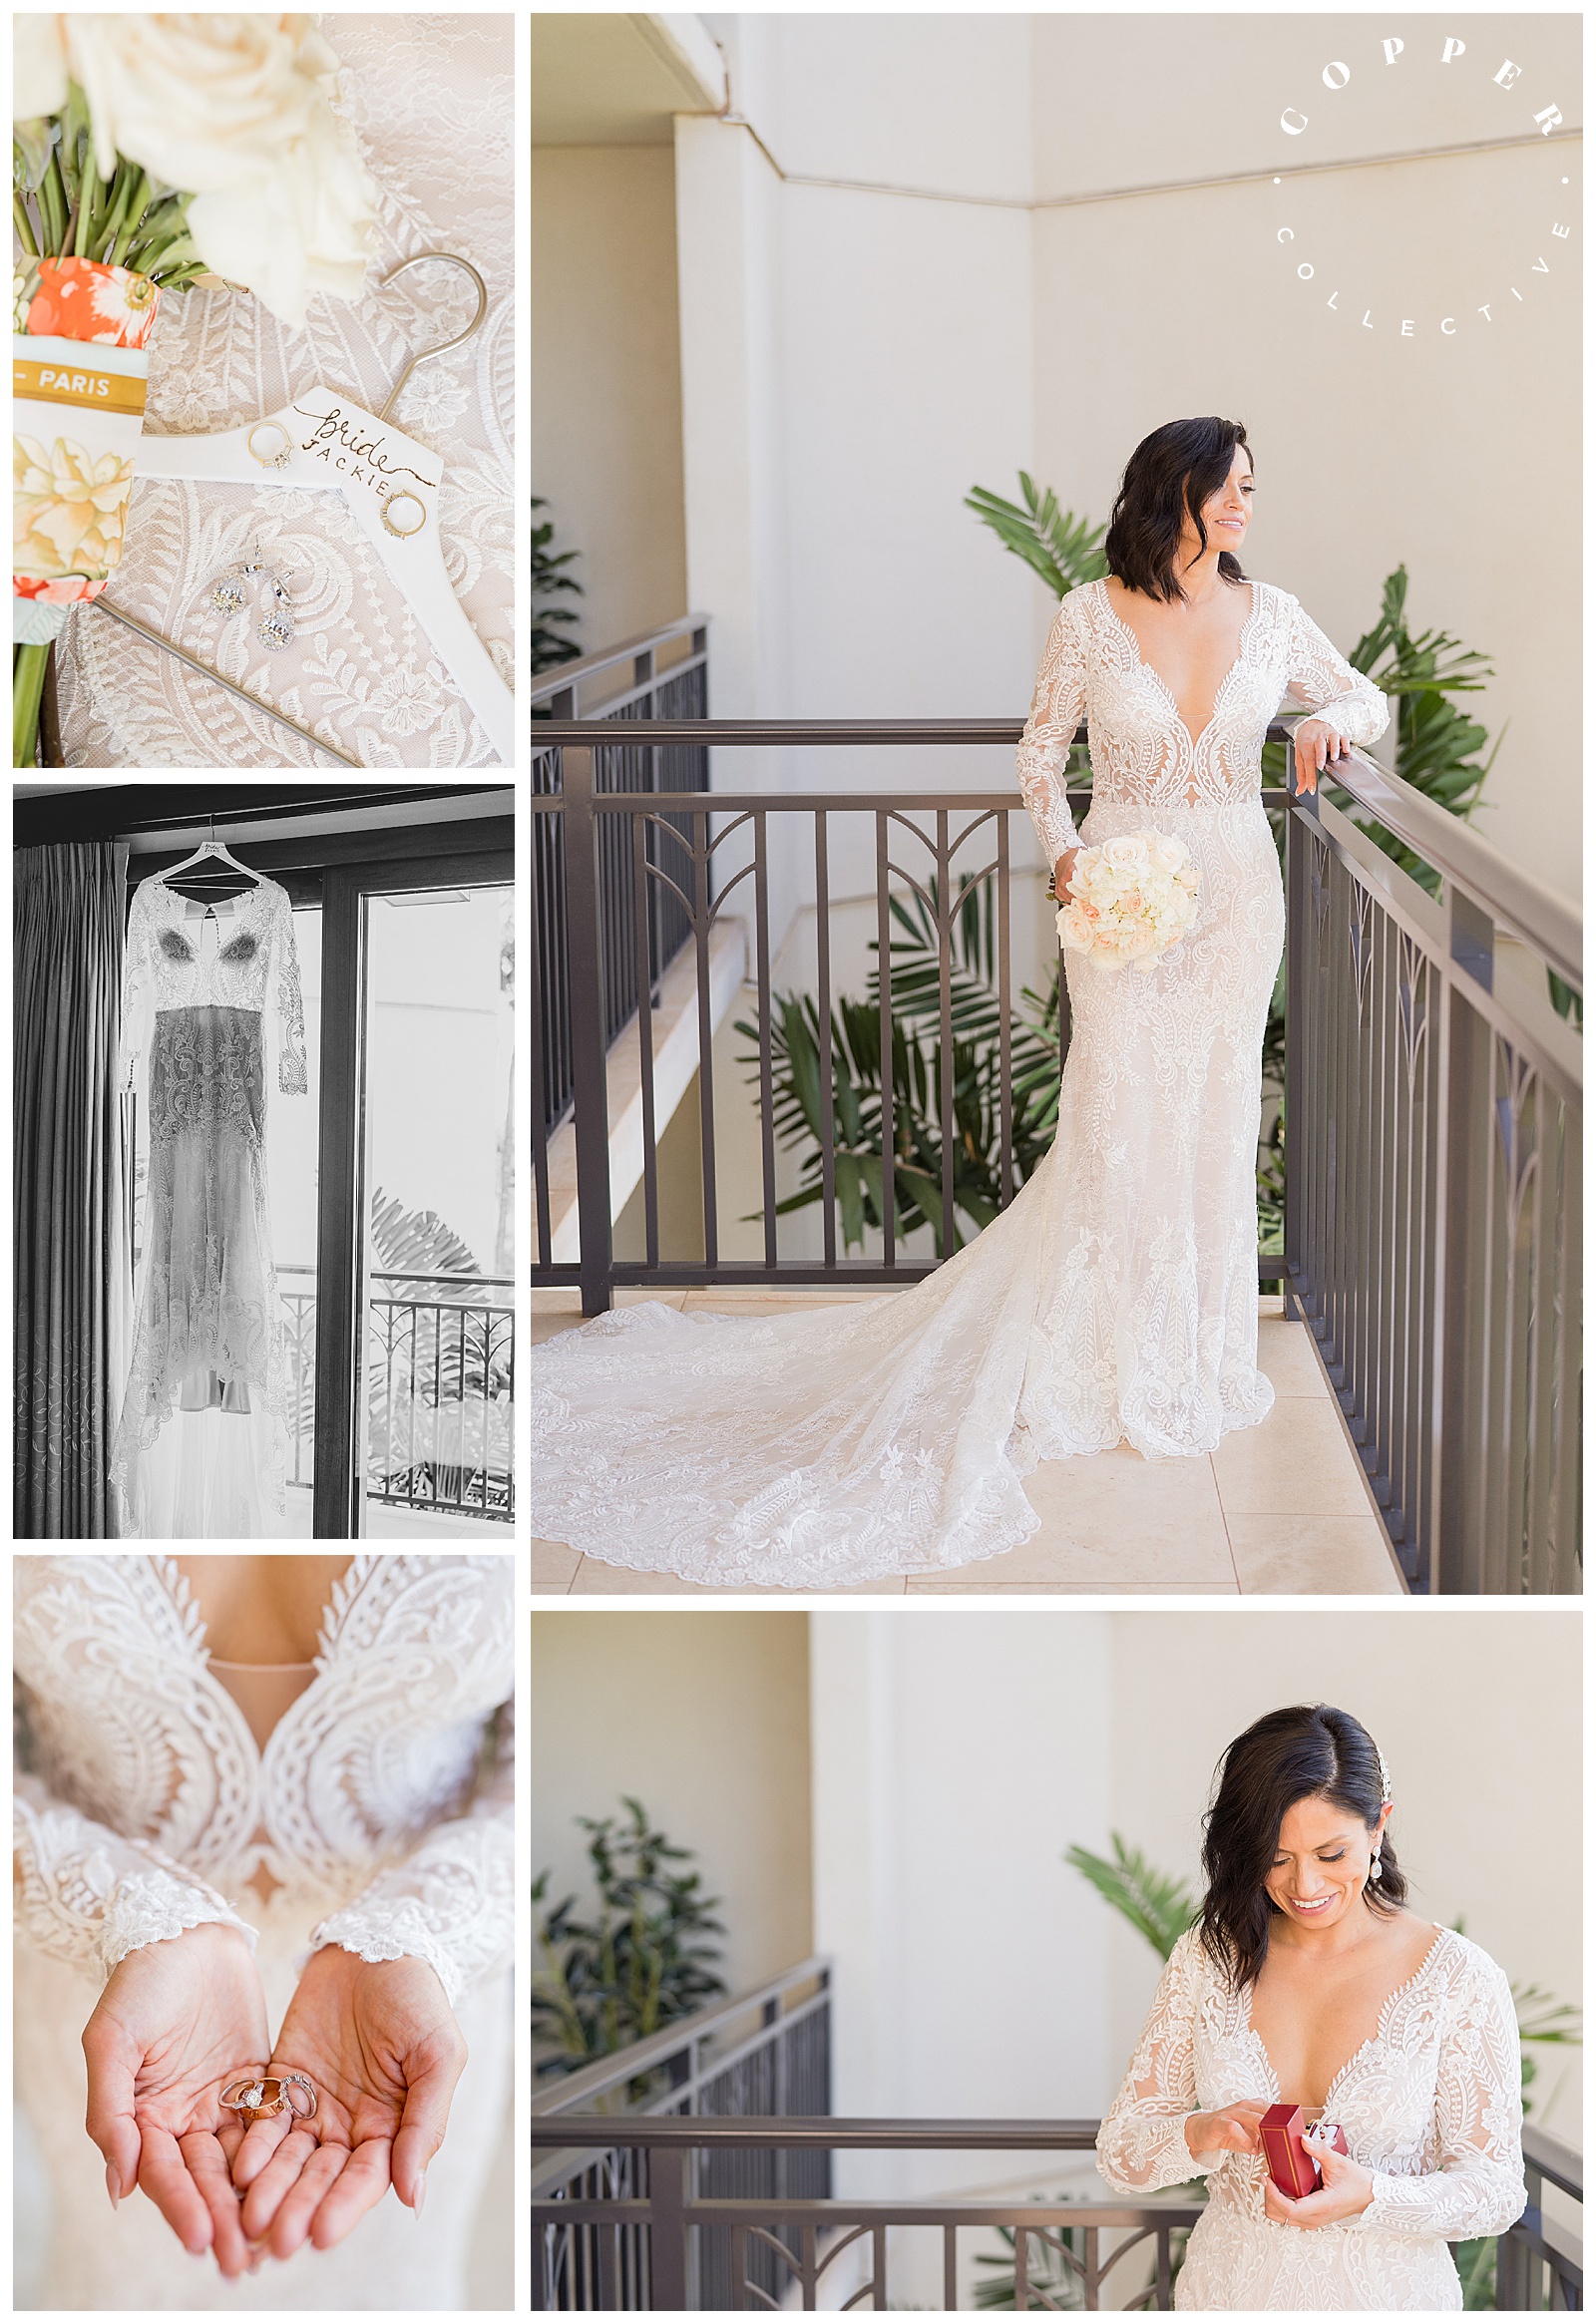 Beautiful Bride Getting Dressed in Lace Wedding Gown